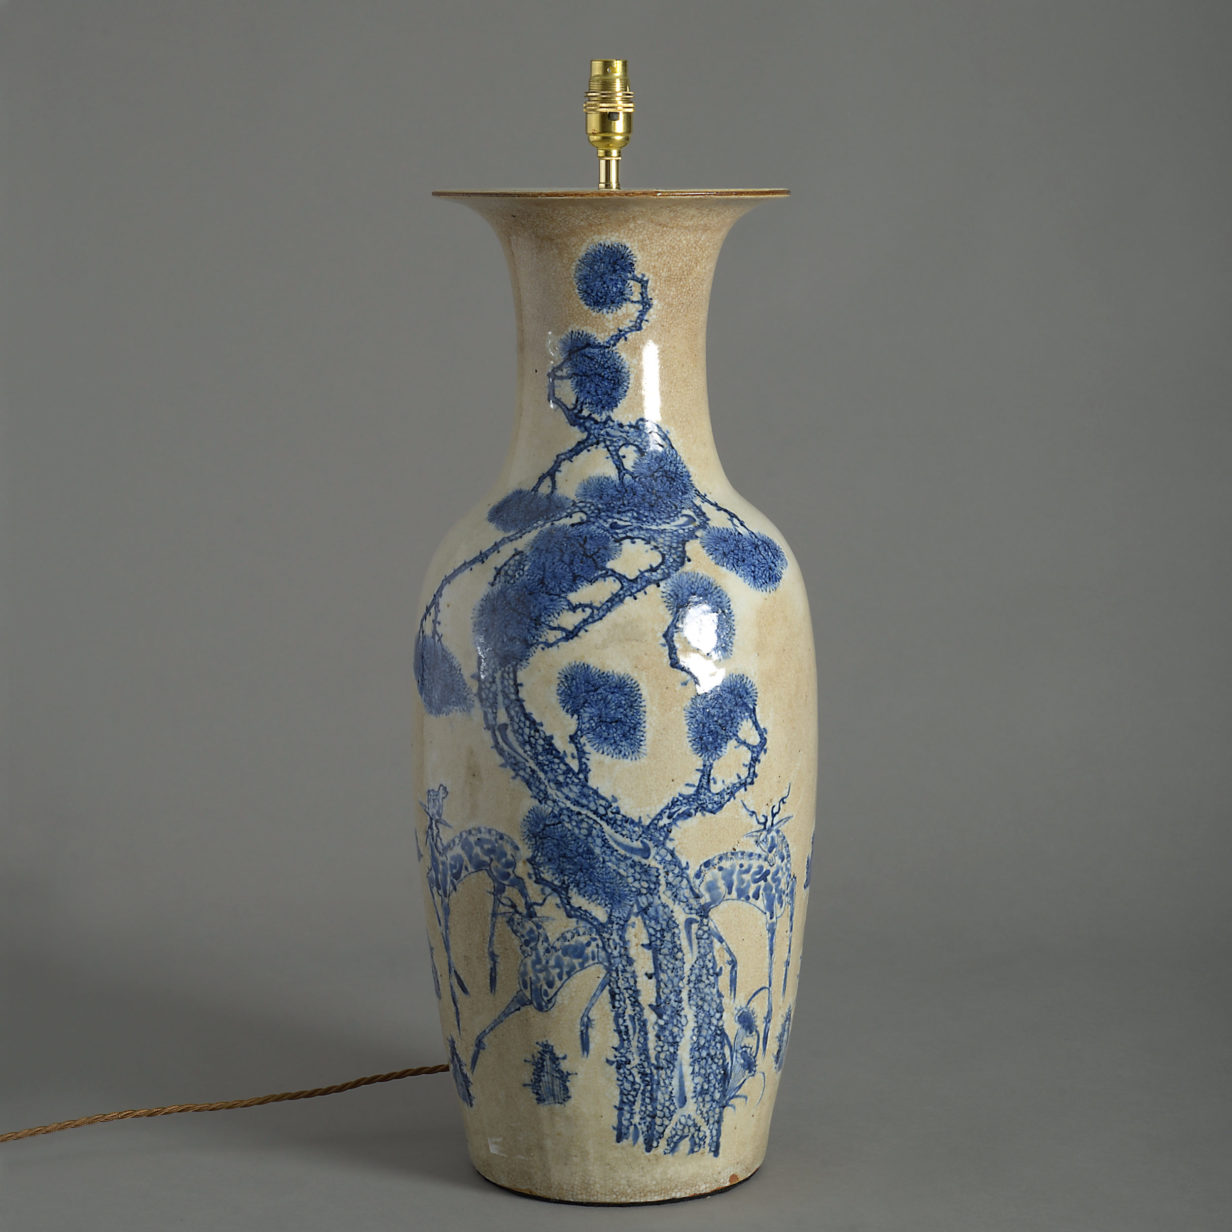 A mid-19th century chinese export porcelain vase lamp